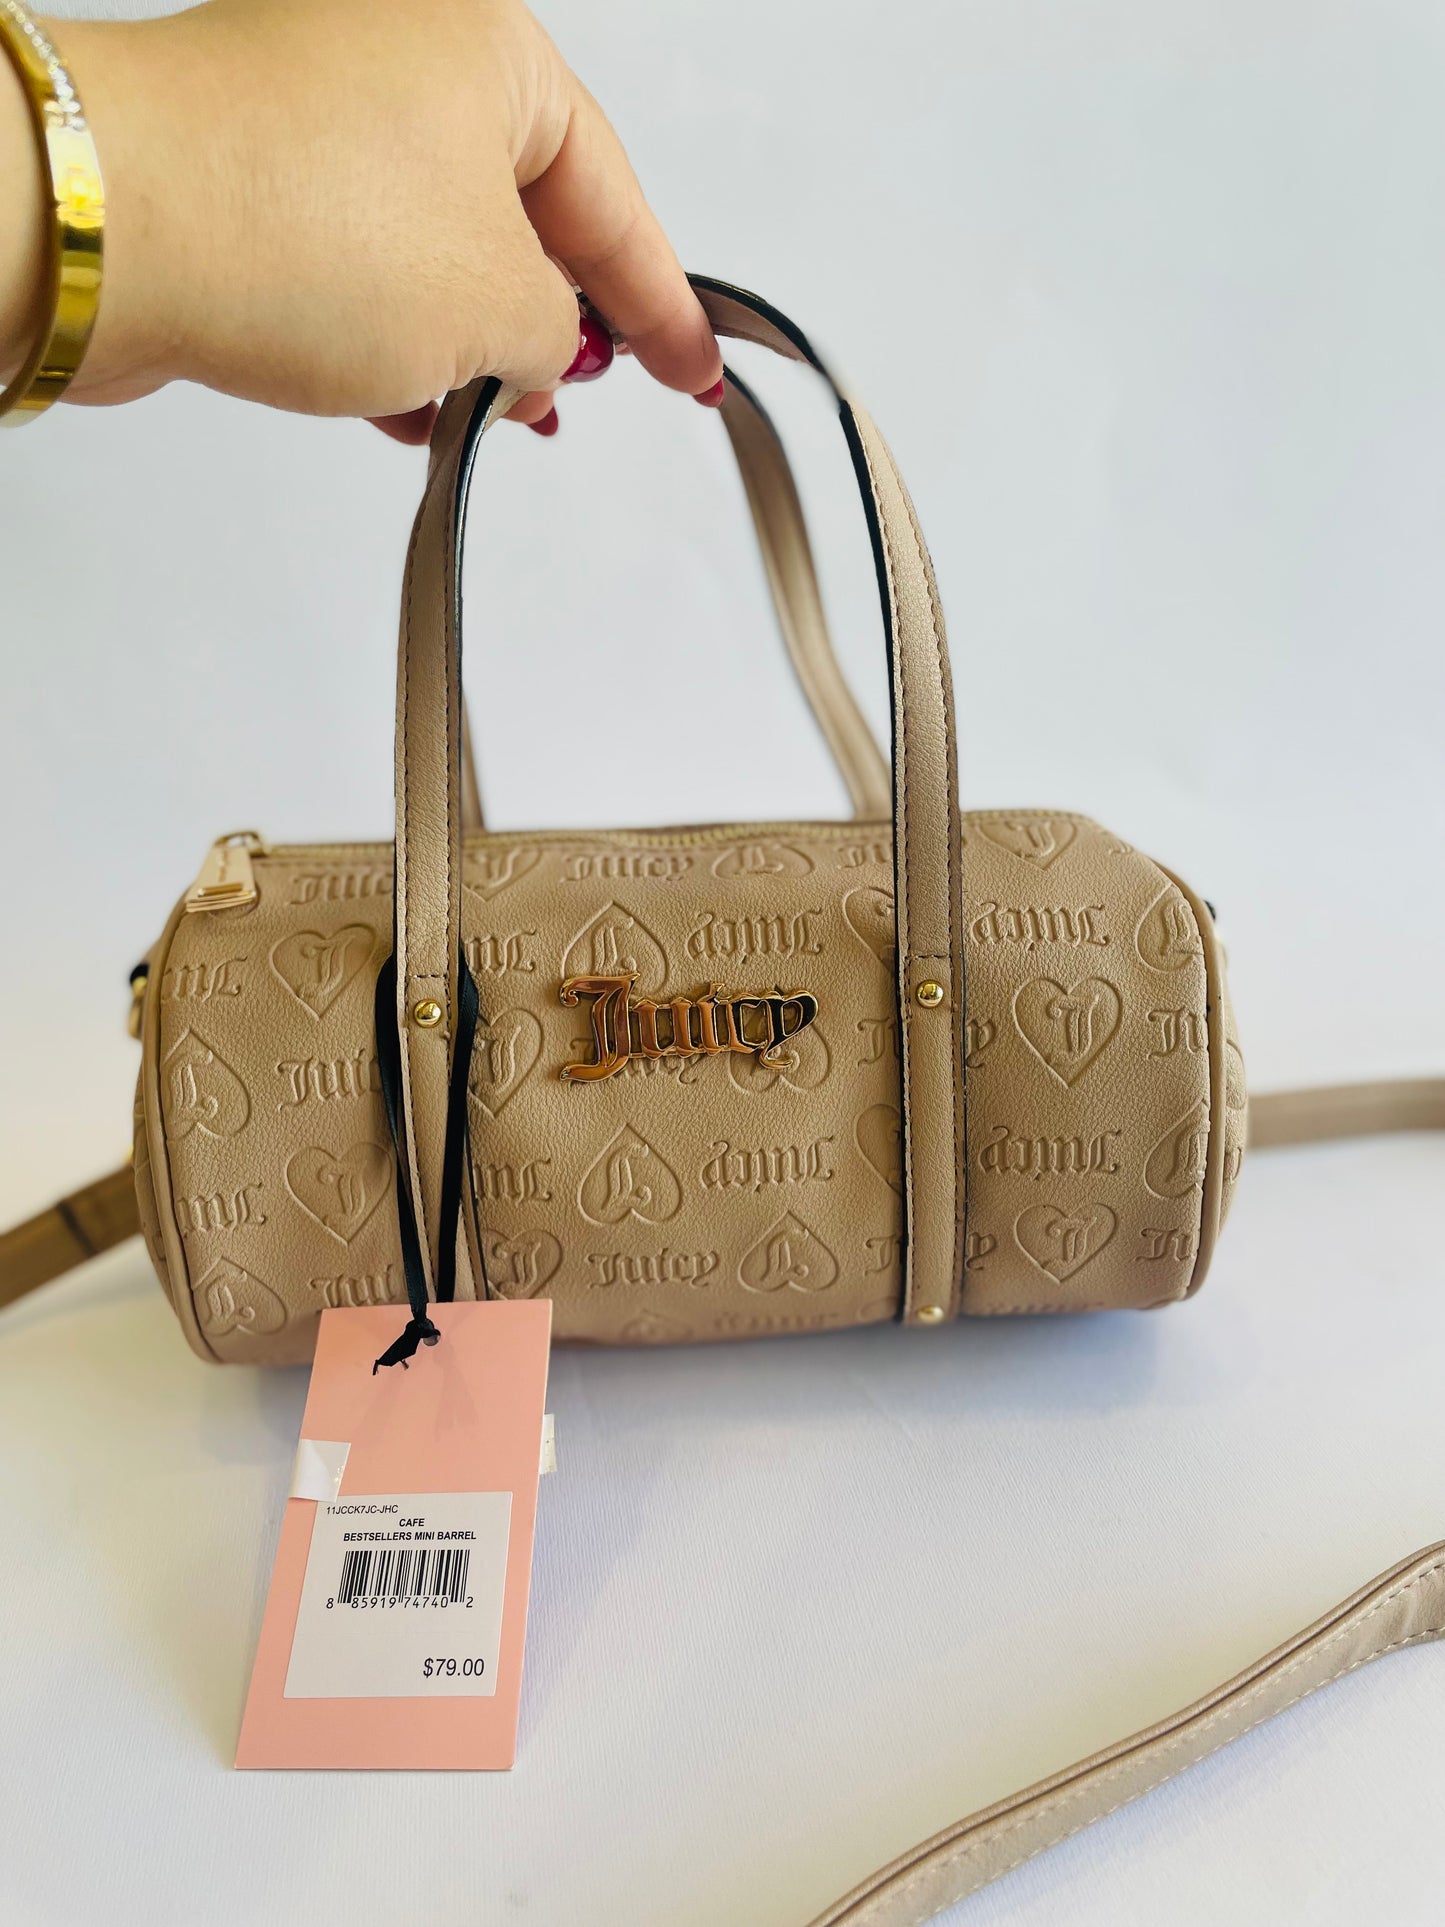 Juicy couture bag